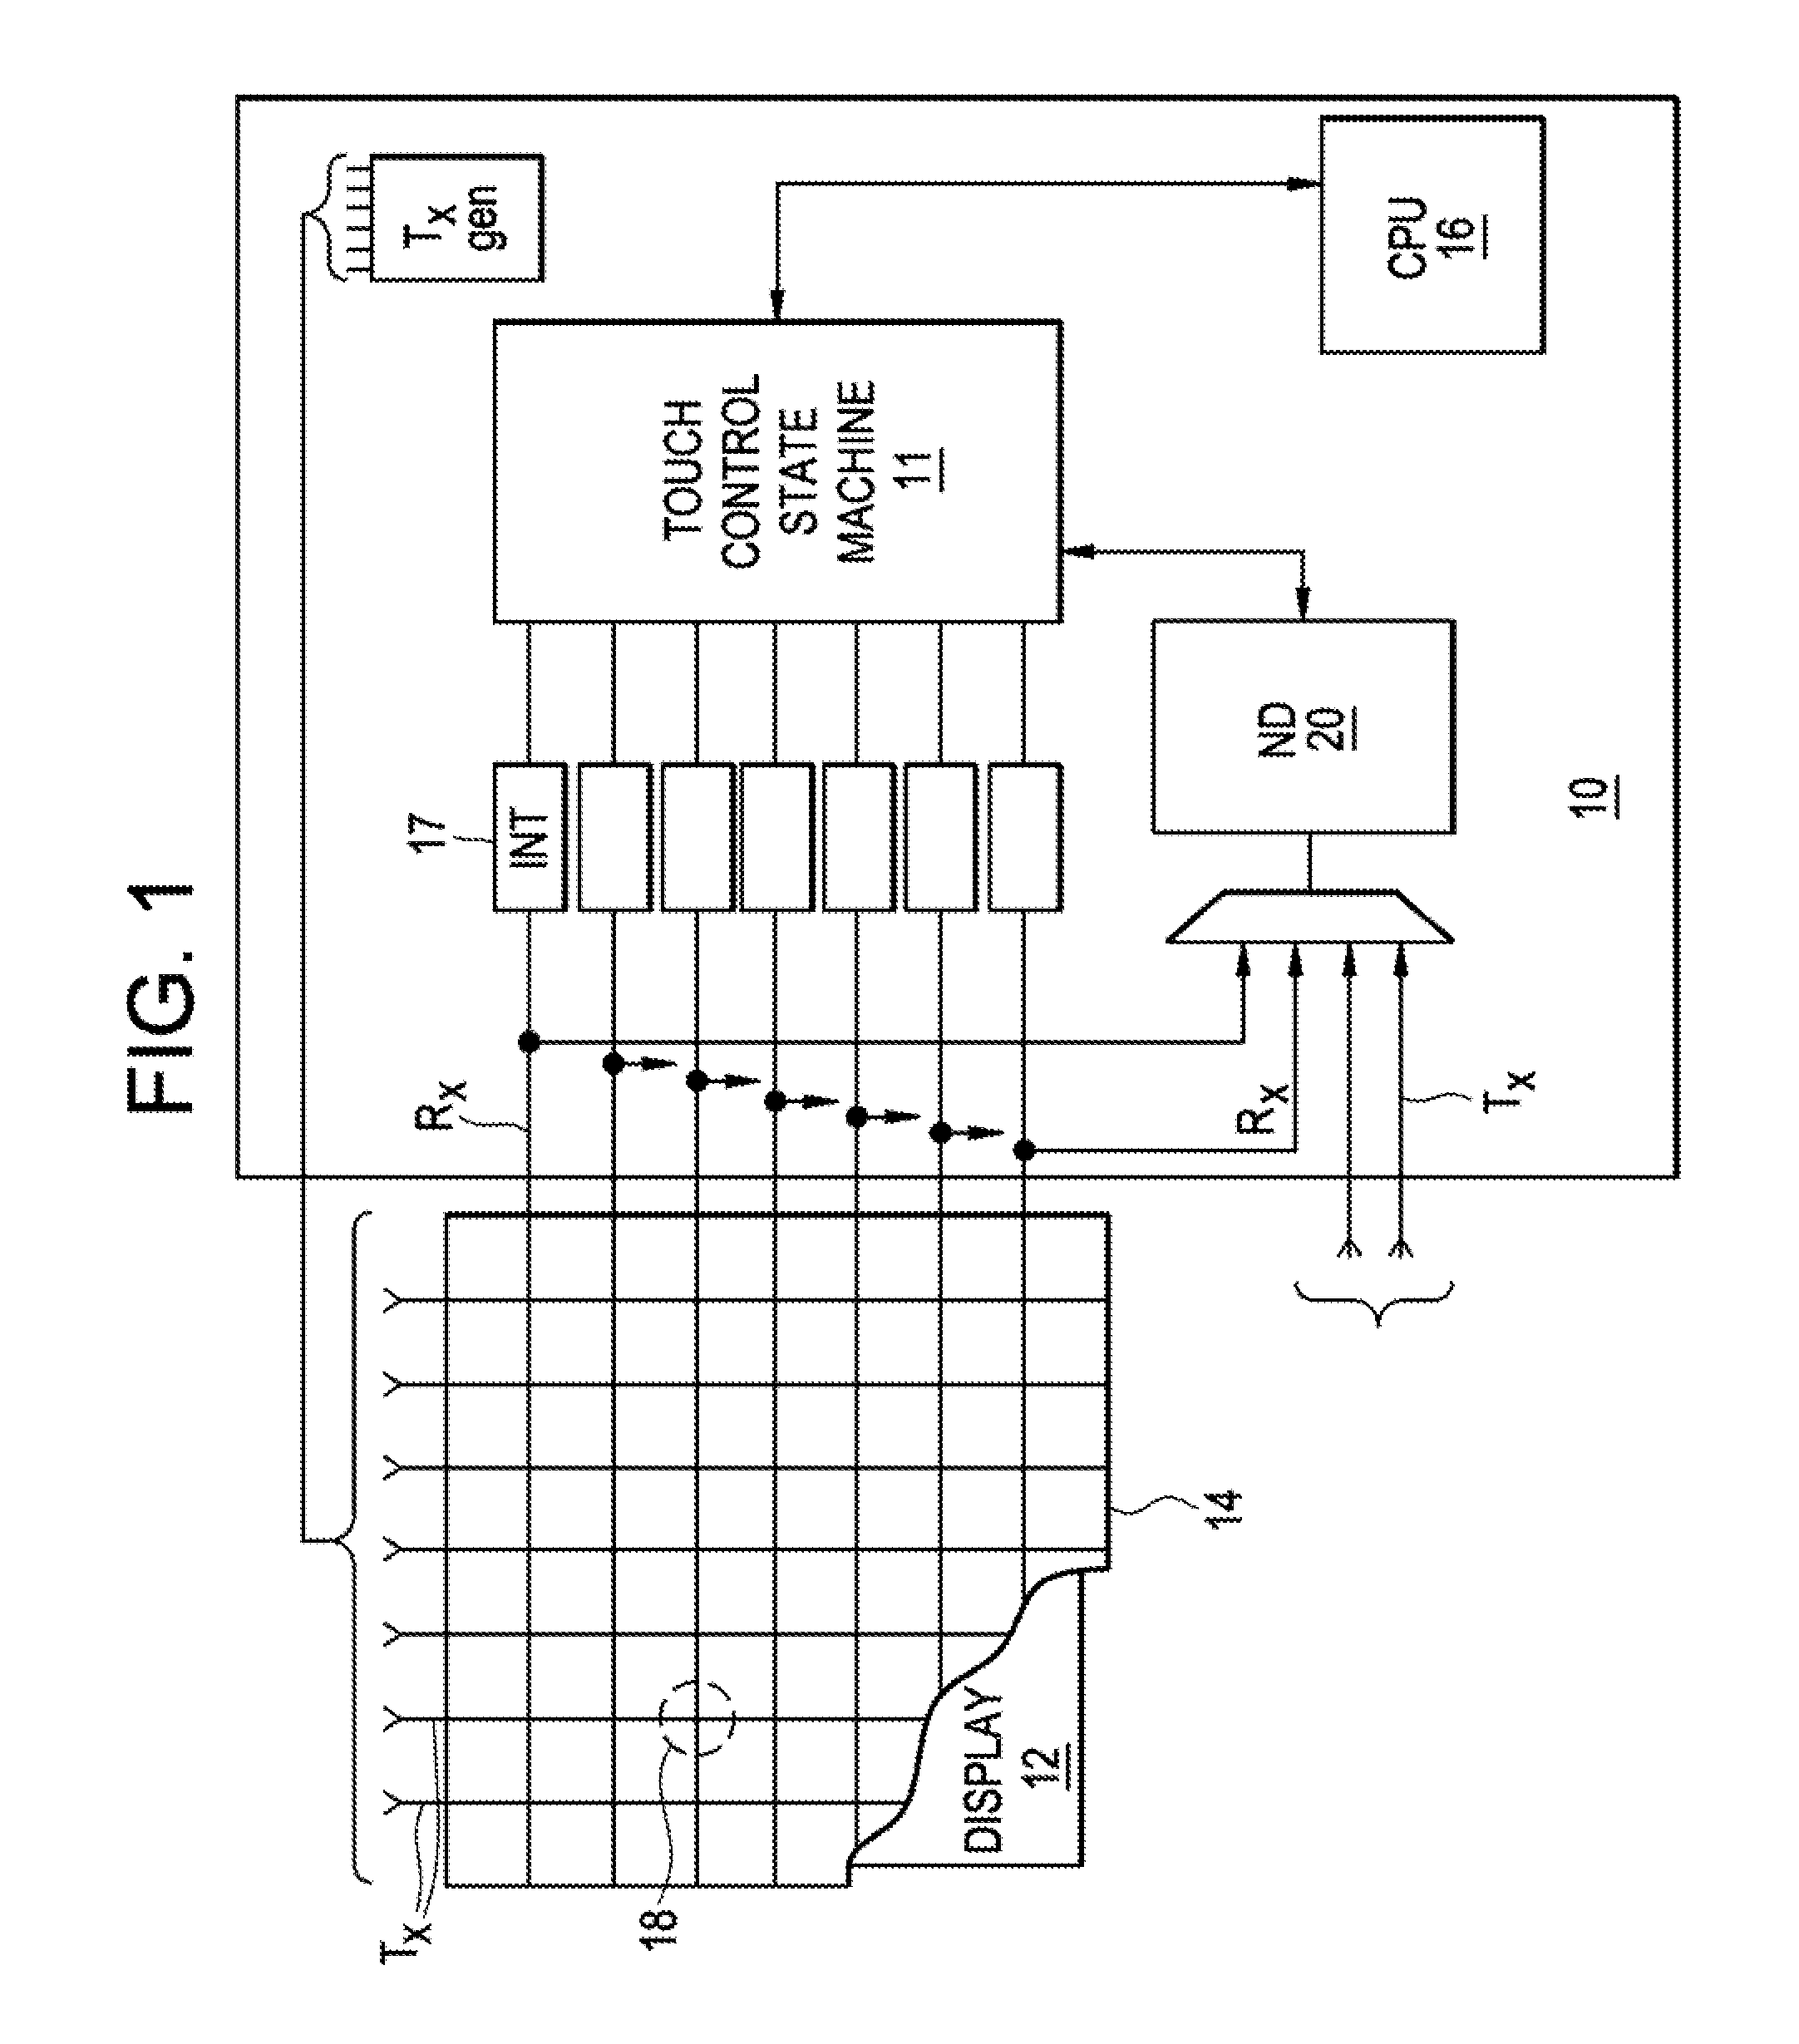 Method and apparatus for reducing coupled noise influence in touch screen controllers